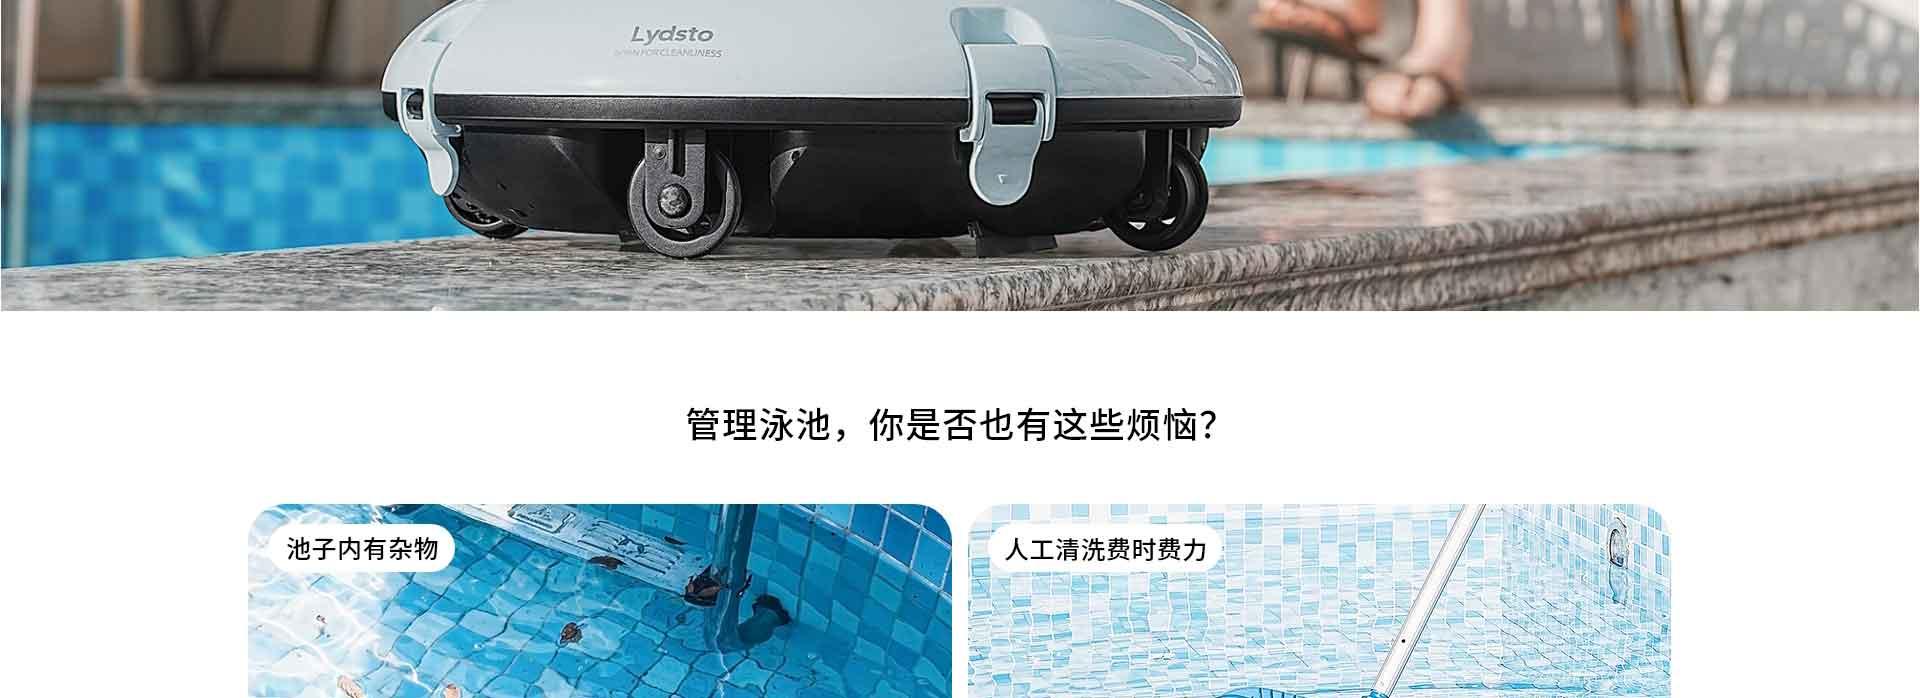 This is the lydsto product image